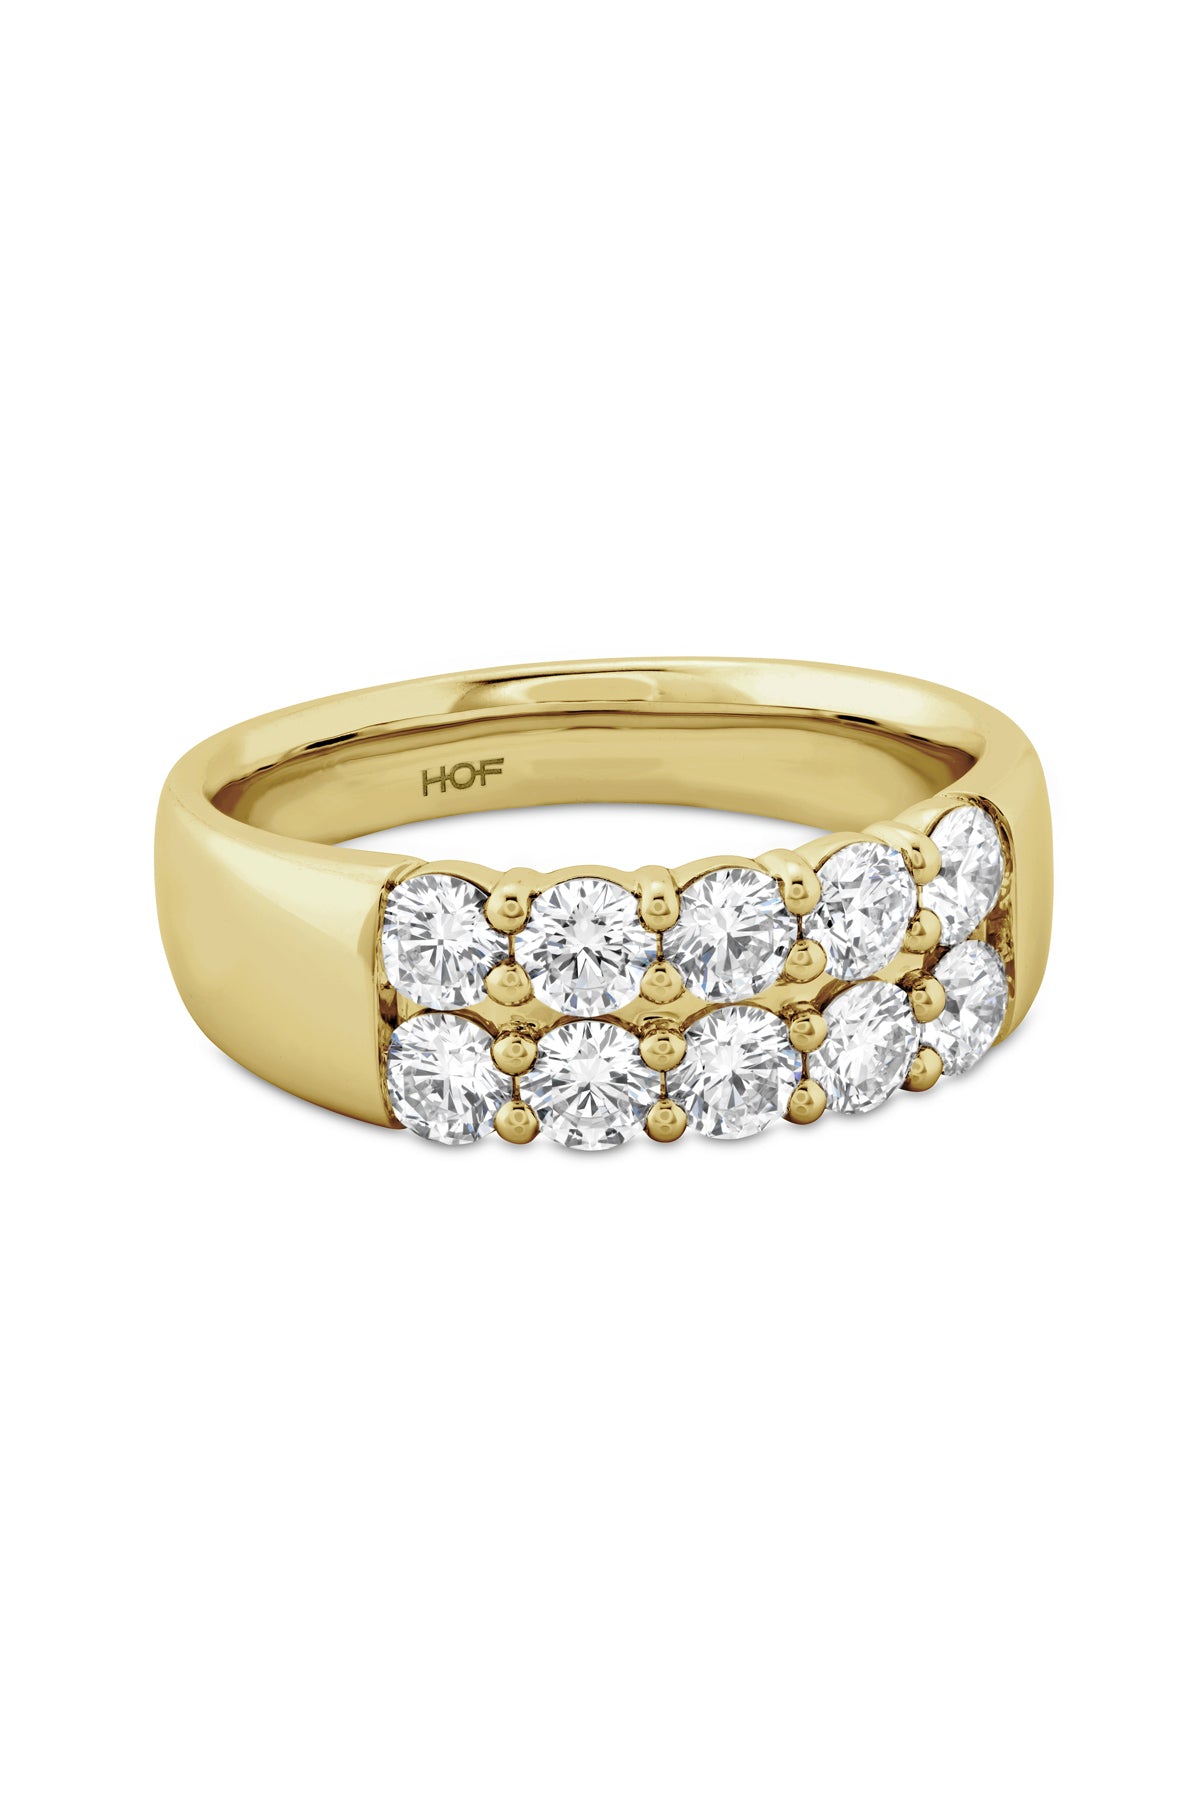 Signature Double Row Ring From Hearts On Fire available at LeGassick Diamonds and Jewellery Gold Coast, Australia.